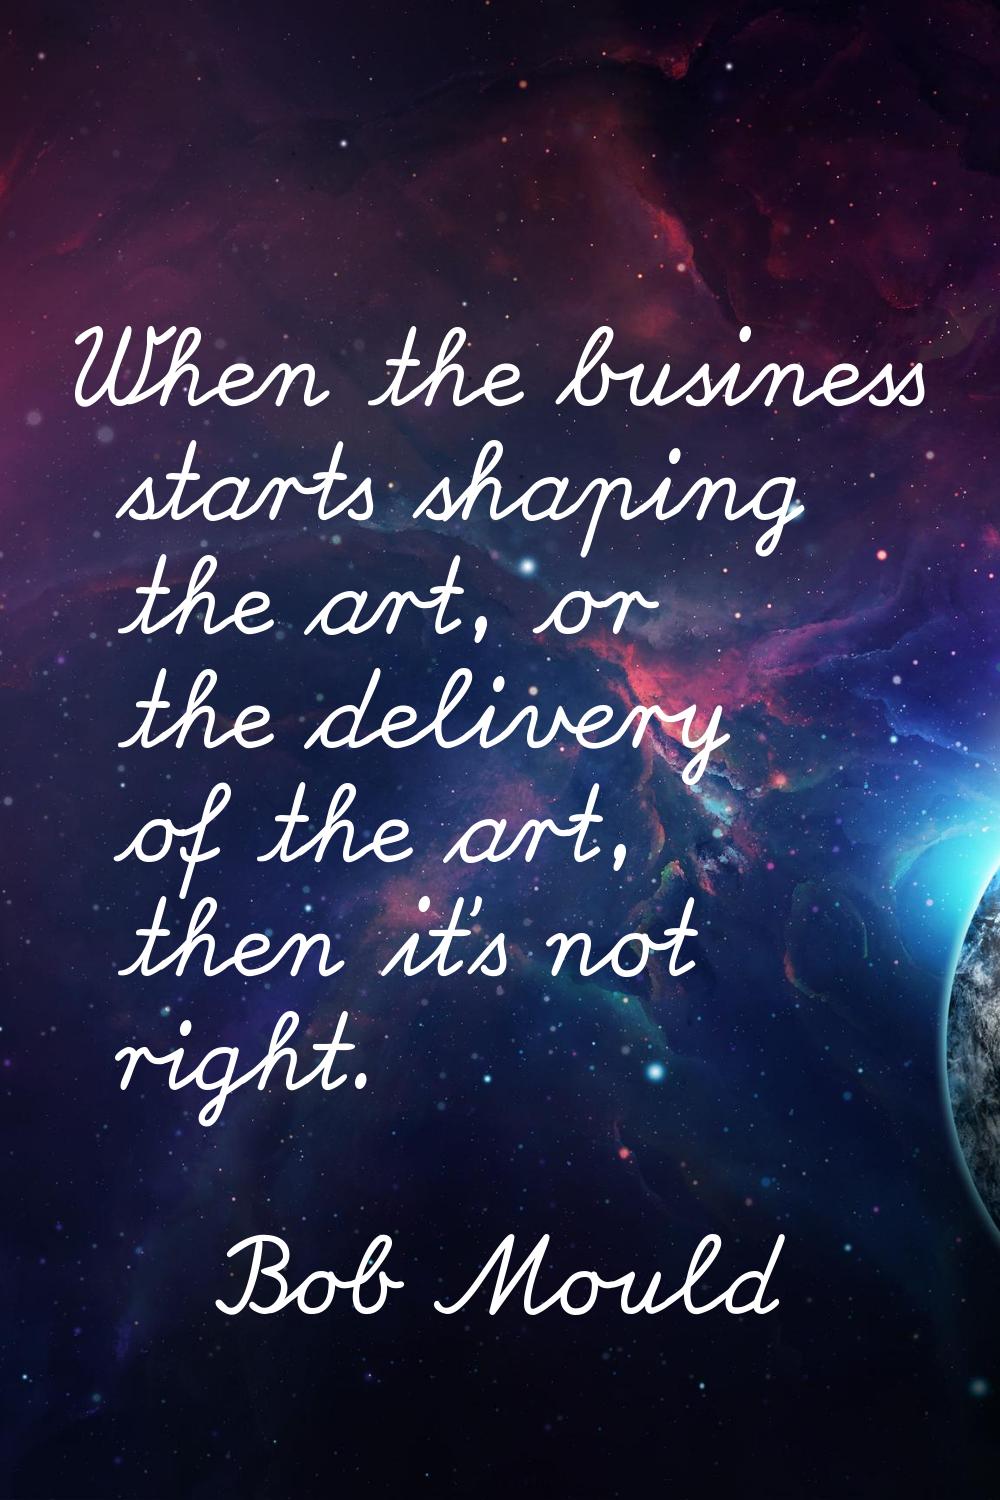 When the business starts shaping the art, or the delivery of the art, then it's not right.